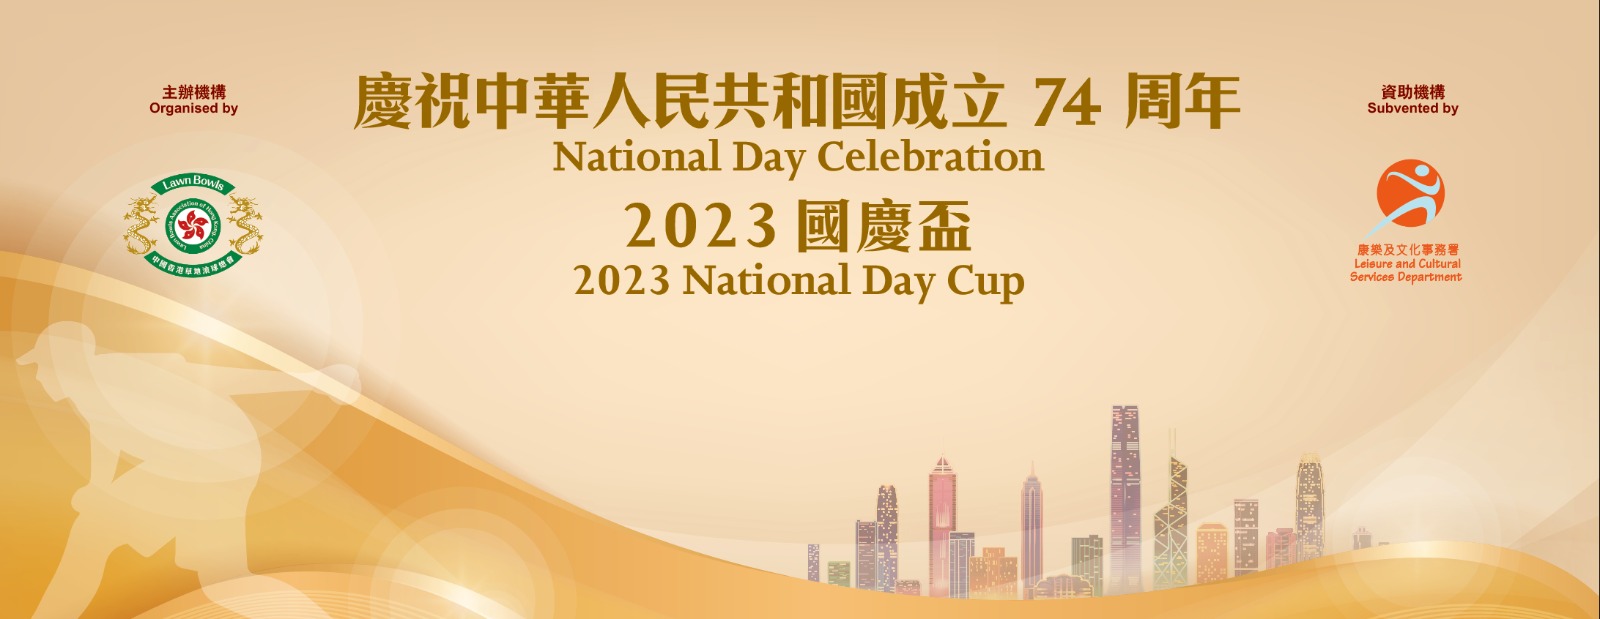 2023 National Day Cup (Updated on 10/10/23)